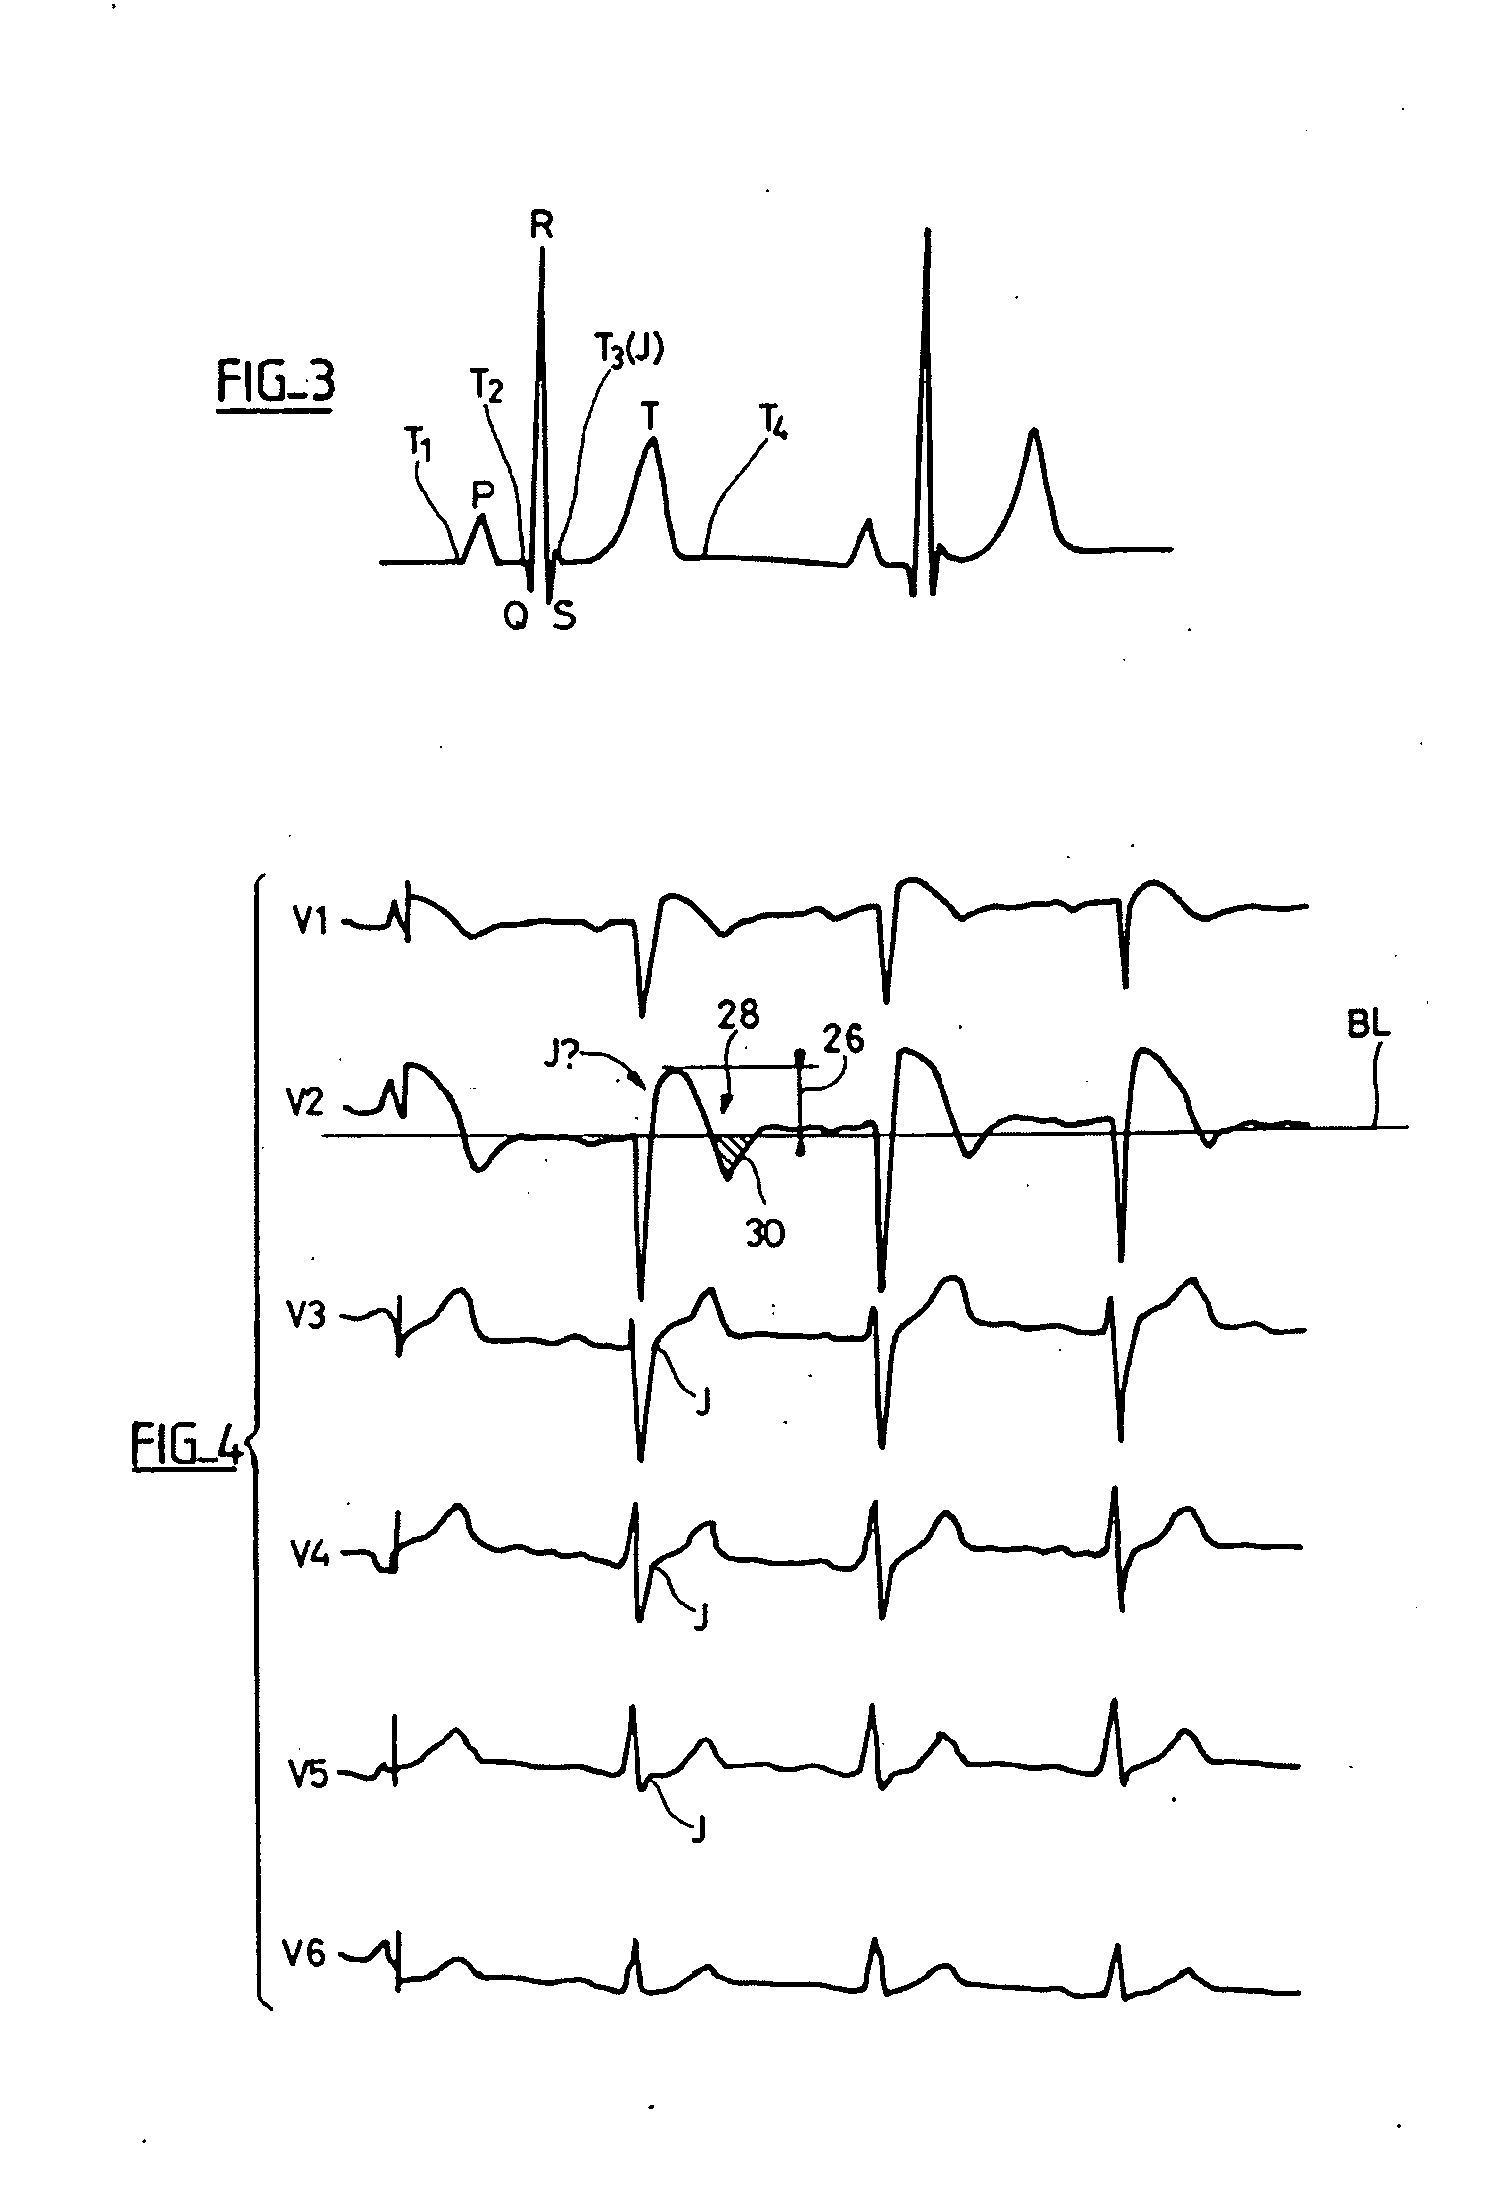 Electrocardiologic device for assisted diagnosis for the diagnostic of brugada syndrome or  early repolarization syndrome